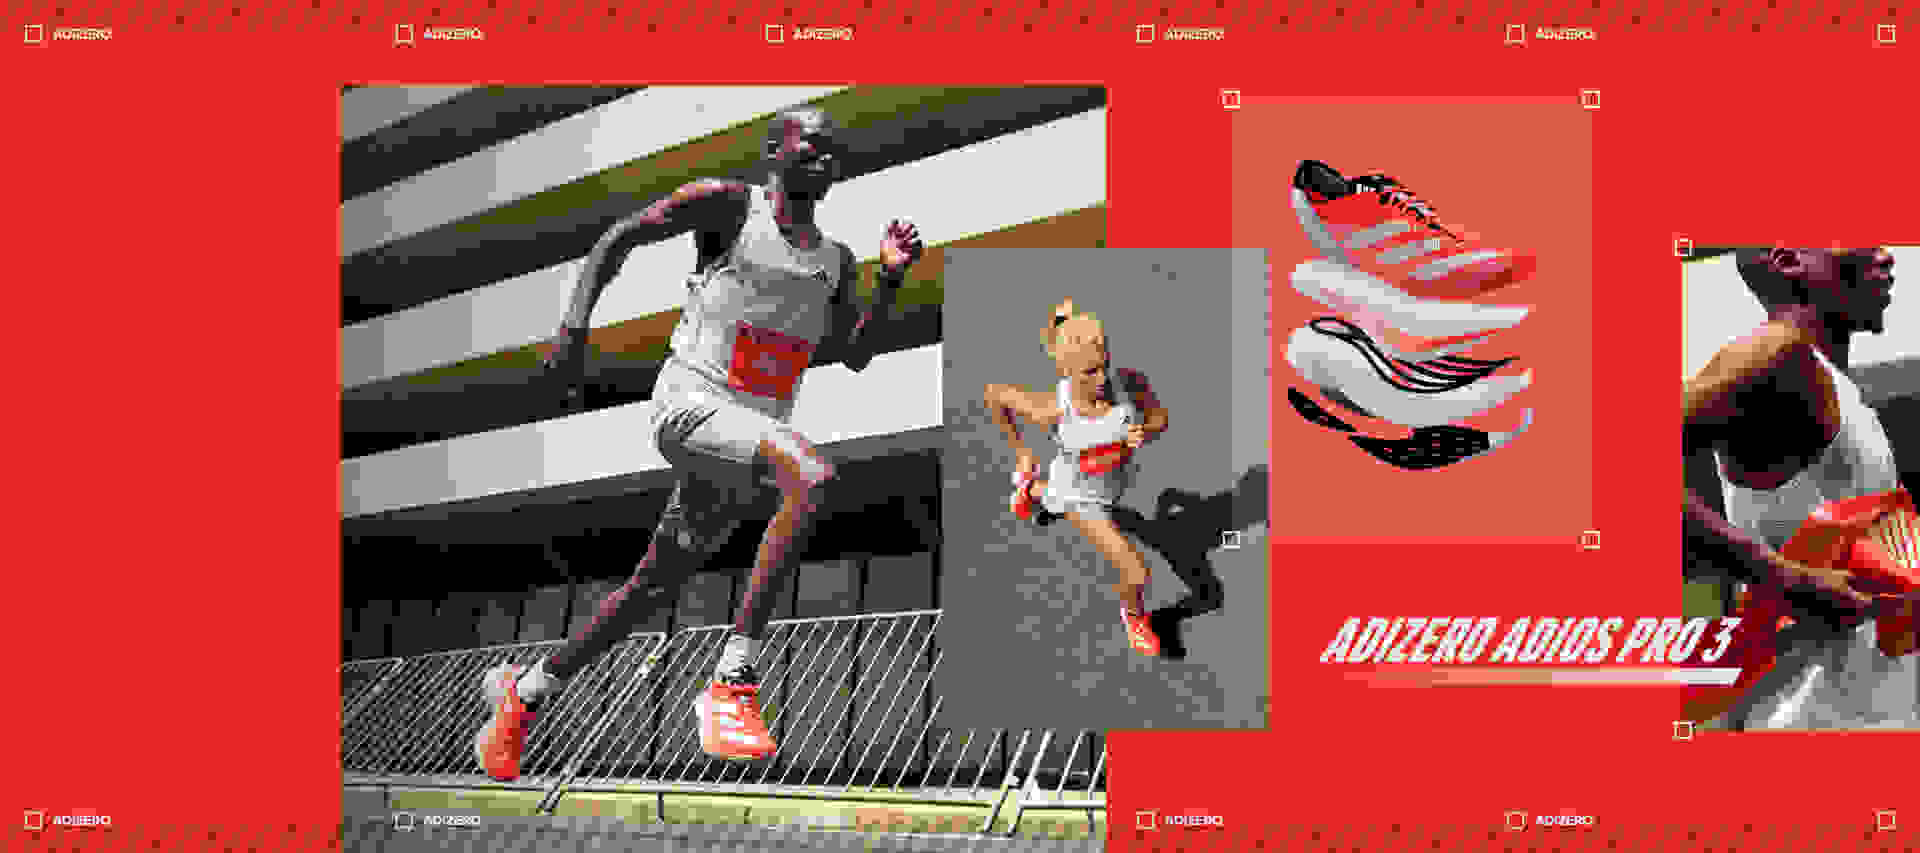 Both male and female runners wear the Adizero Adios Pro 3 shoes while racing. A deconstructed image shows the LIGHTSTRIKE PRO sole, ENERGYRODS 2.0 and CONTINENTAL™ textile rubber.